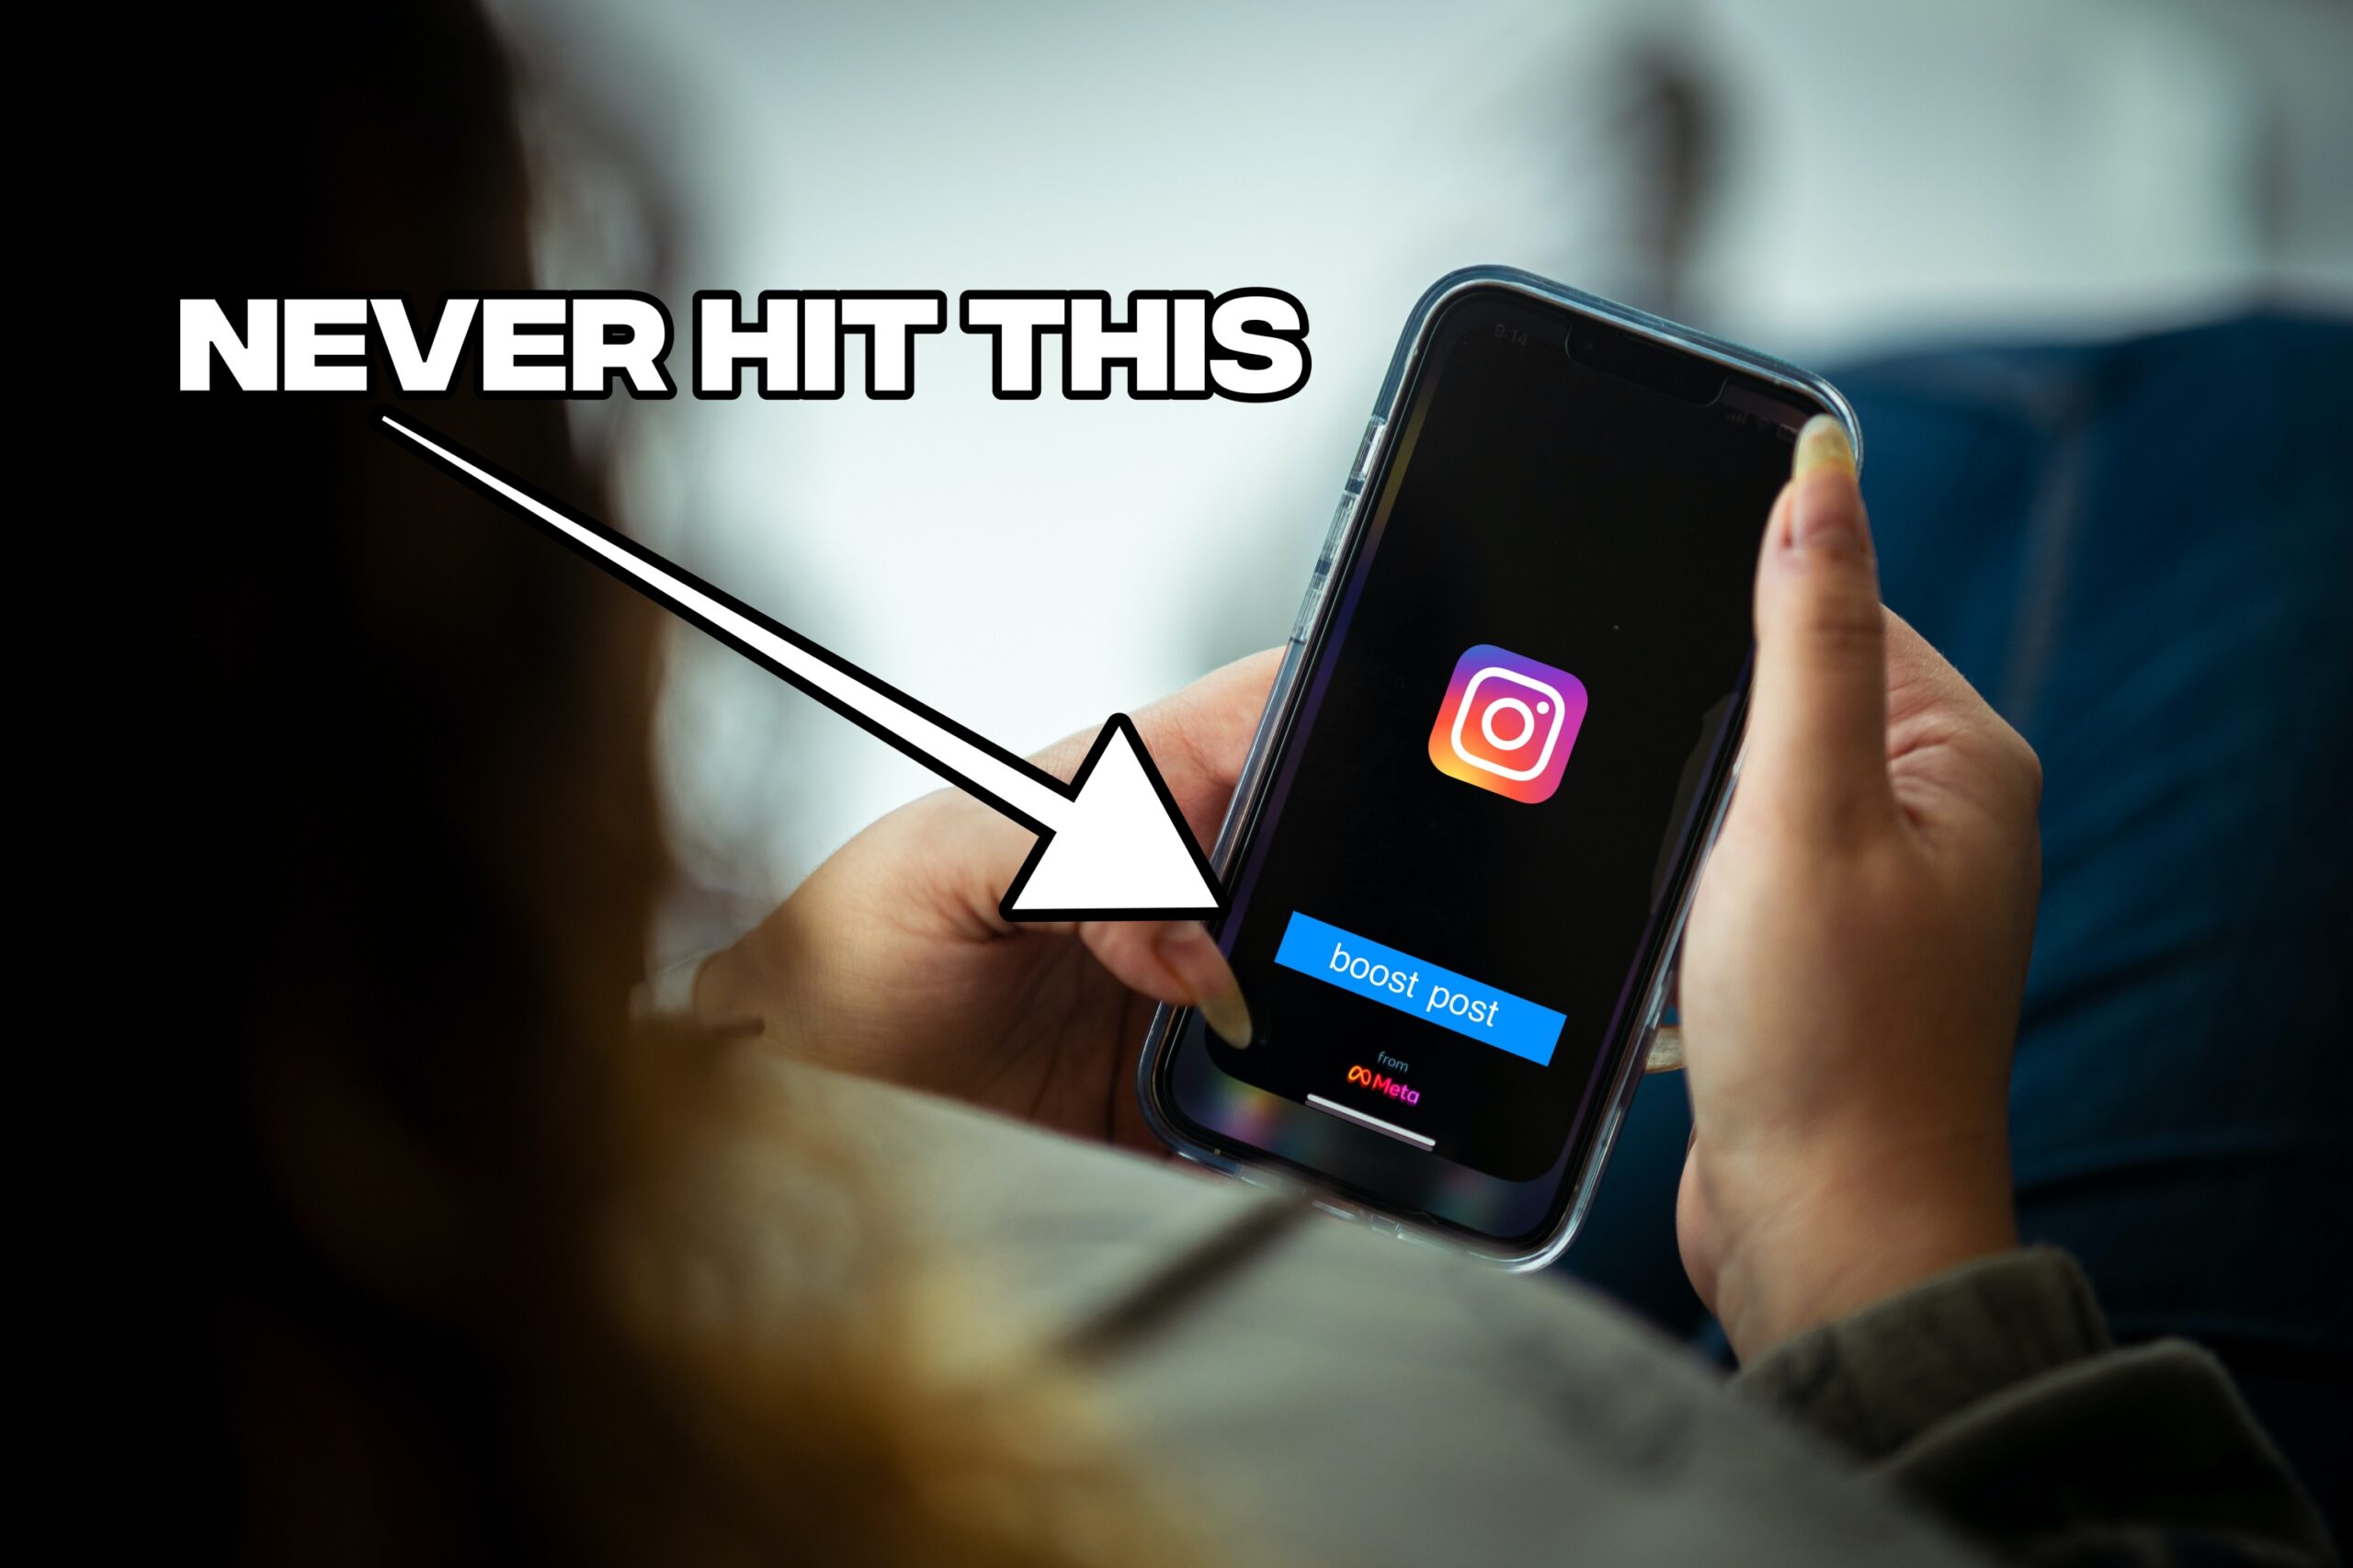 b1oosting your facebook and instagram posts is a bad idea